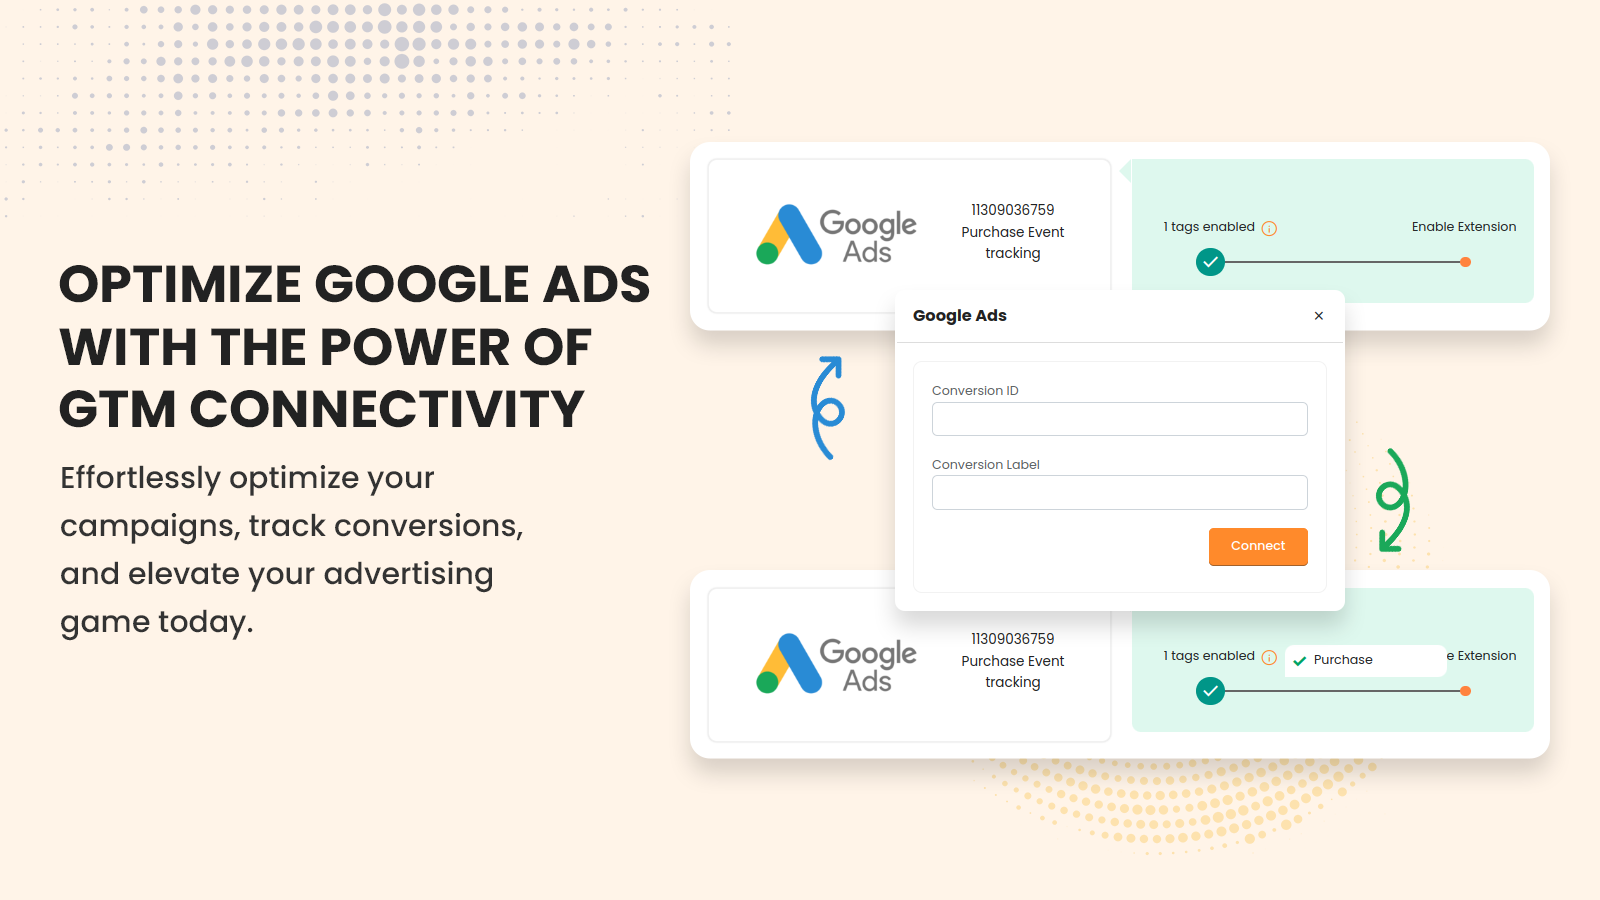 Integrate Google Ads Via GTM and Track Conversions